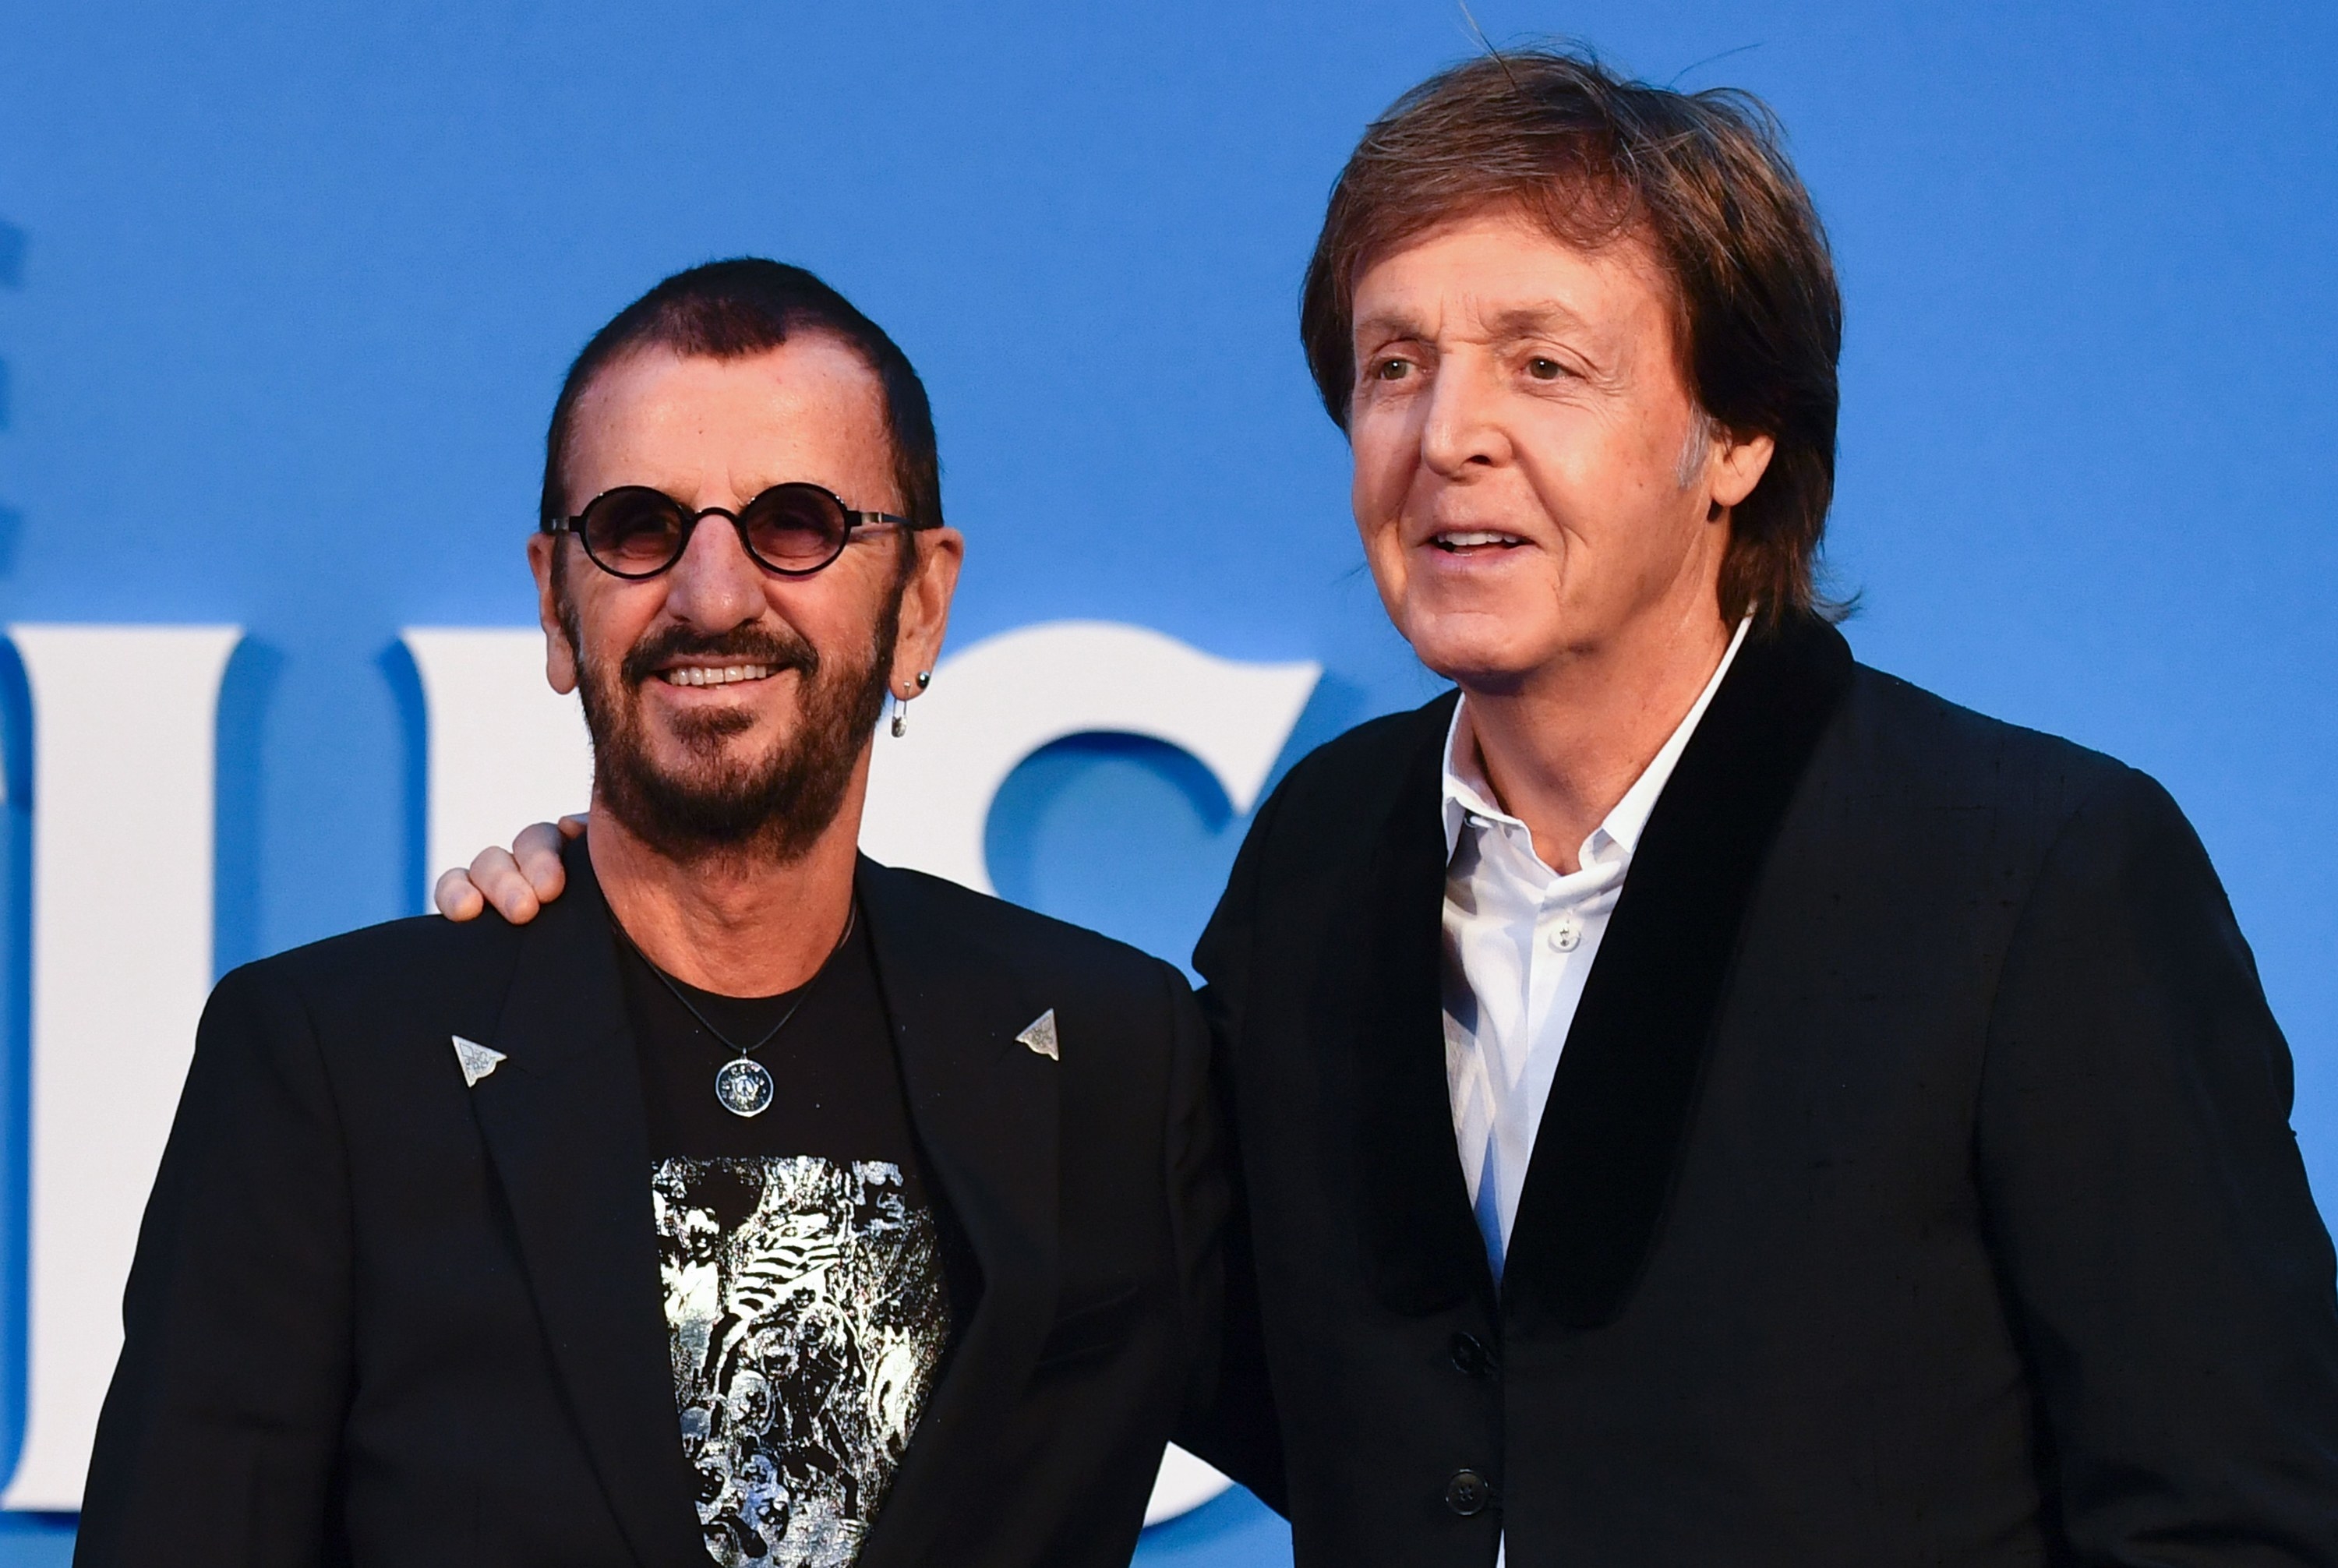 Paul and Ringo pose together